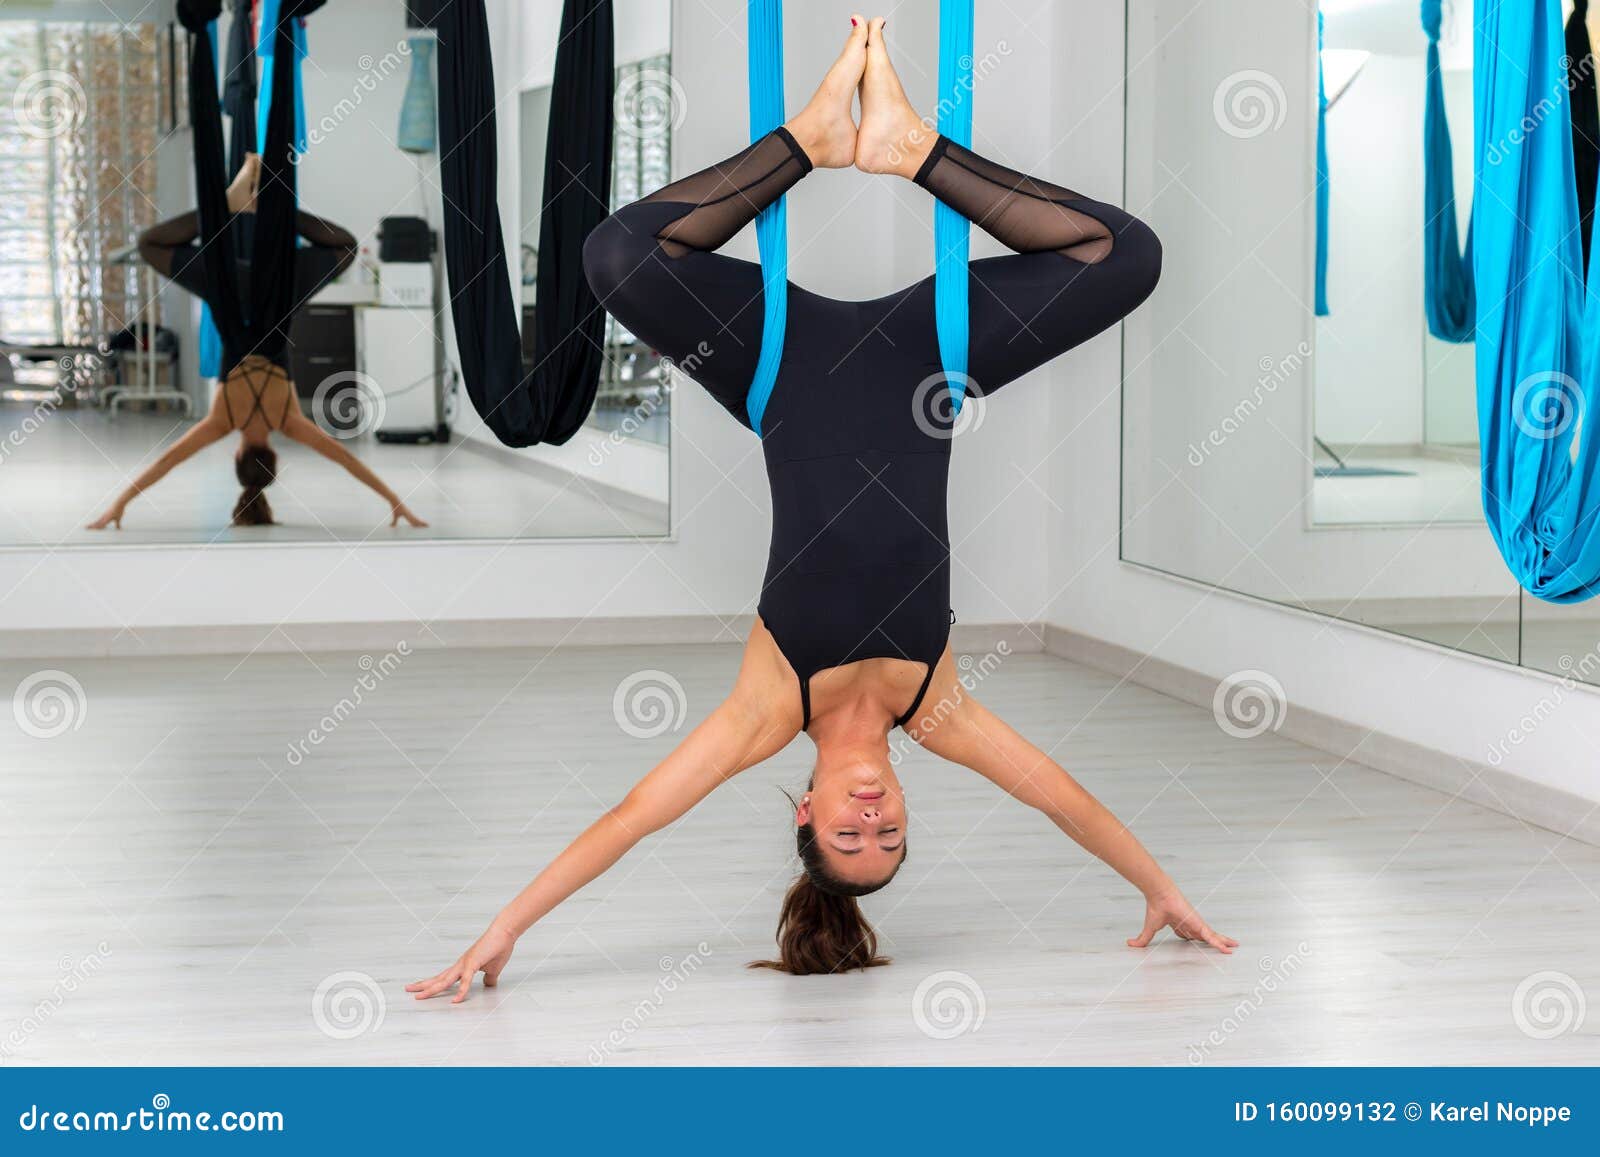 attractive young woman at aero yoga session in gym